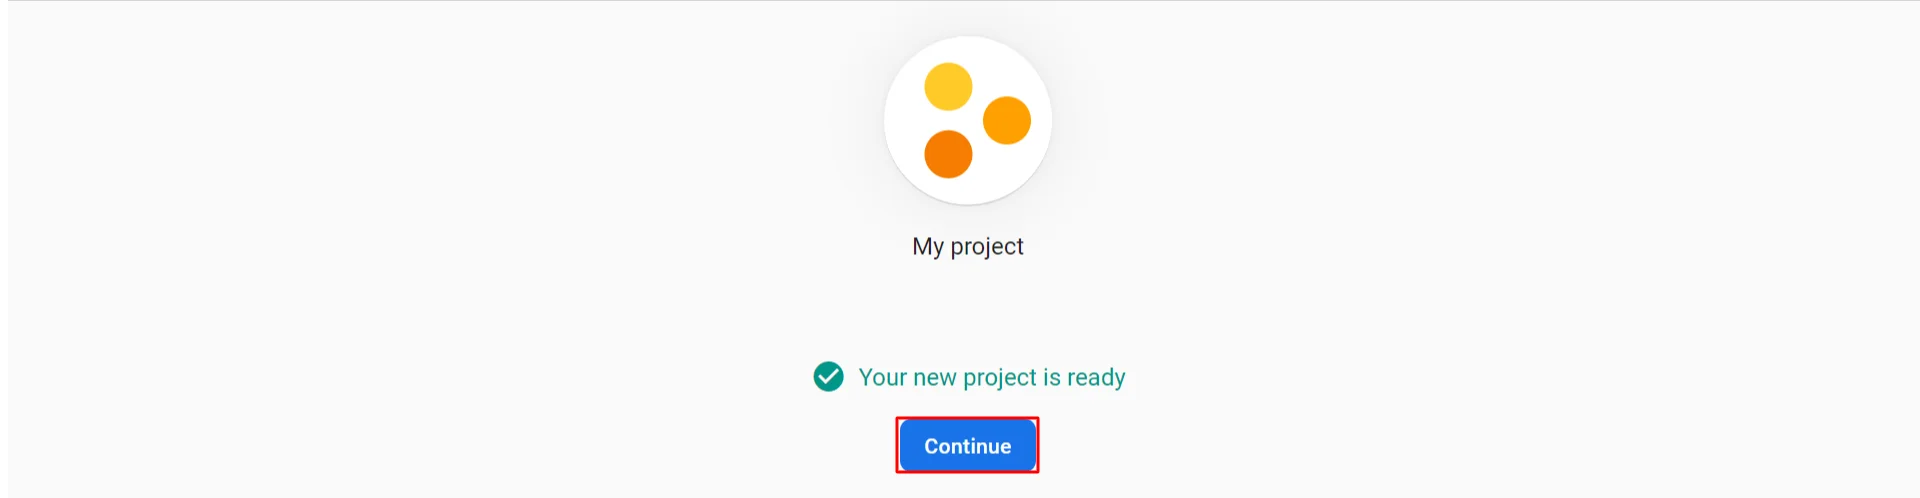 Your new project is ready